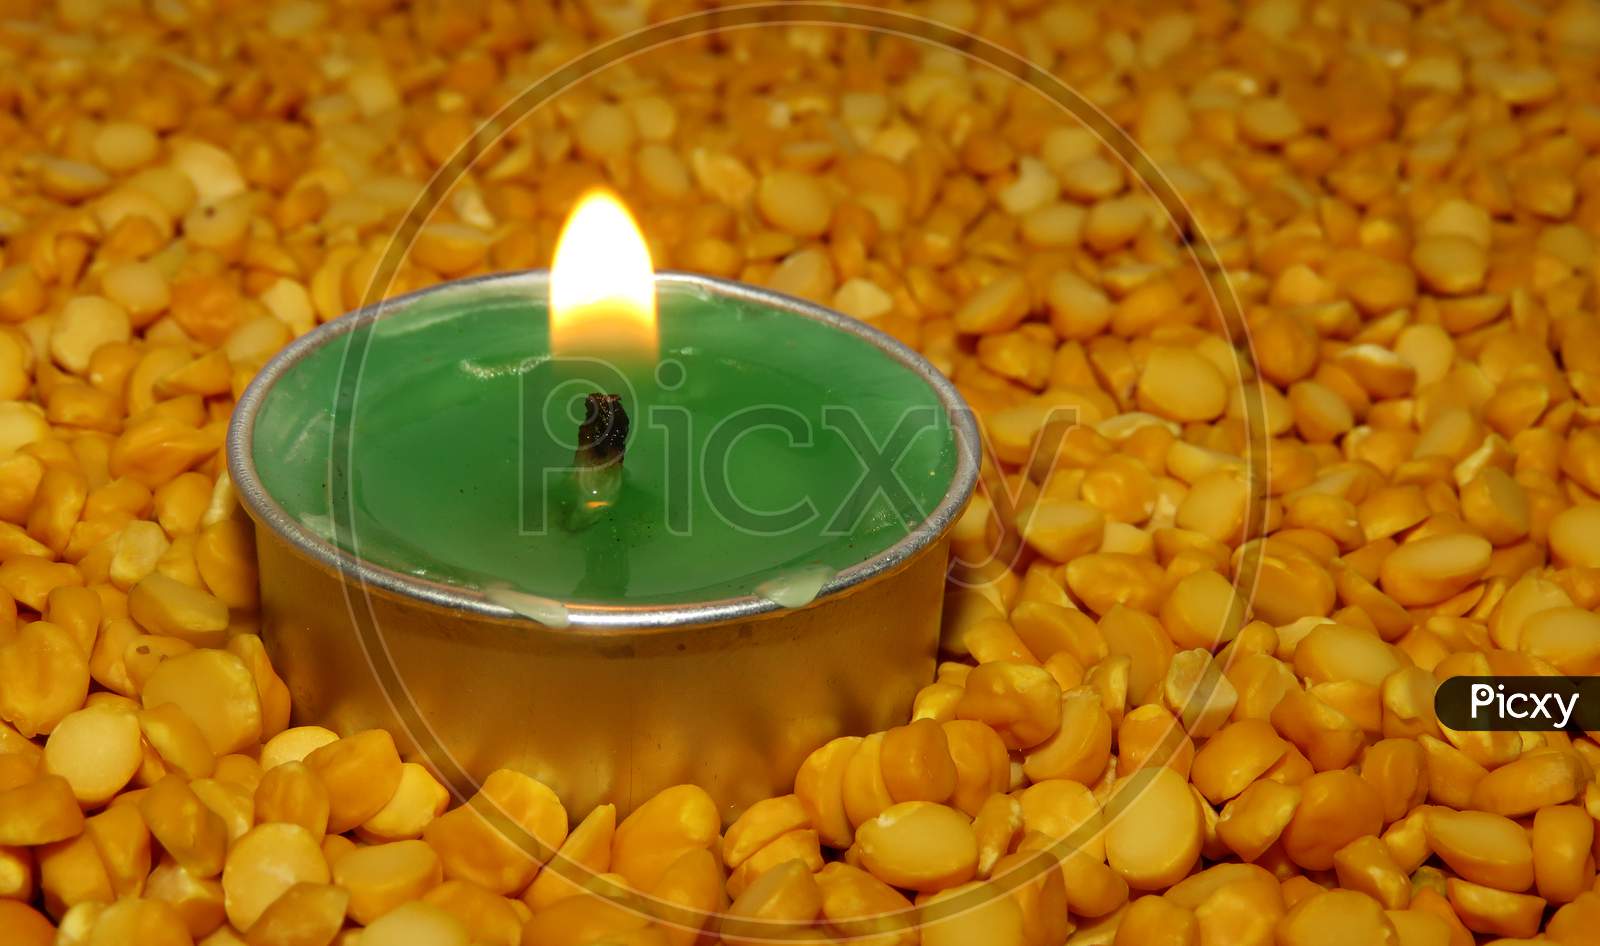 burning candles Split pea ,Candles on Split pea background,Green candles on the seeds,Burning Candles.